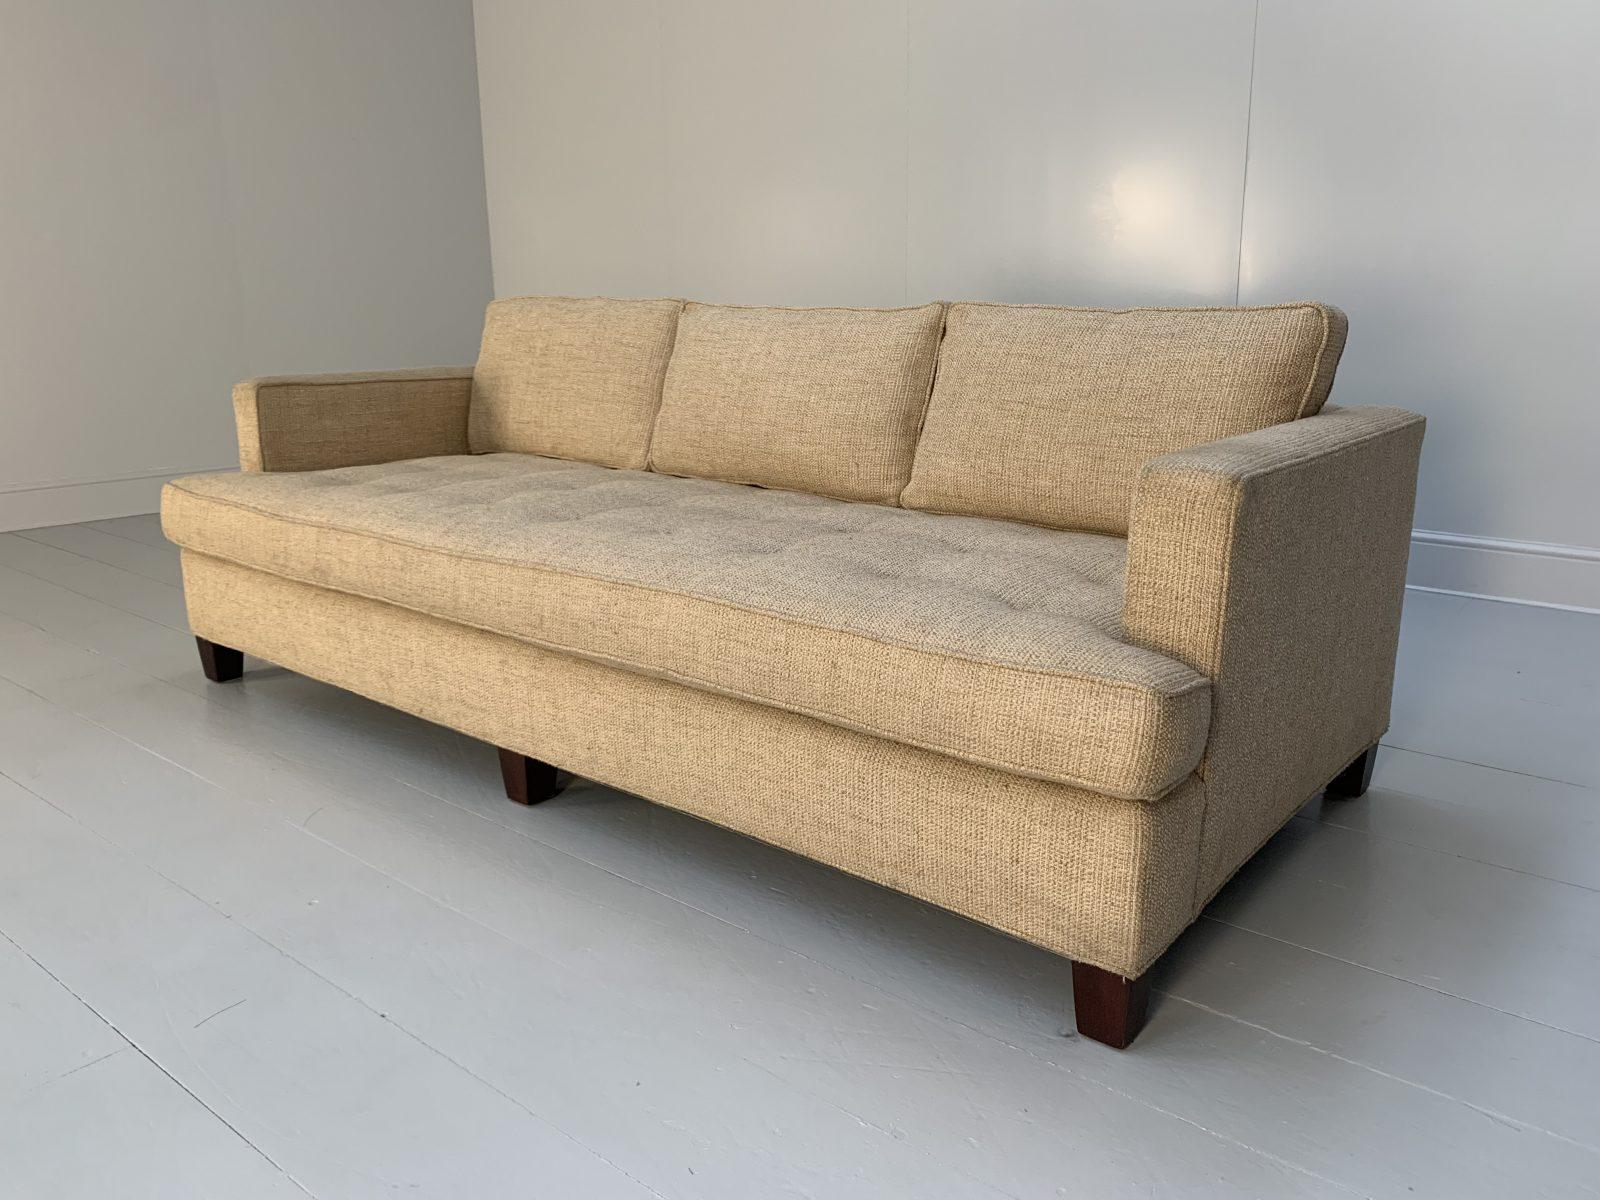 Contemporary Ralph Lauren “Club” 3-Seat Sofa – In Woven Wool For Sale